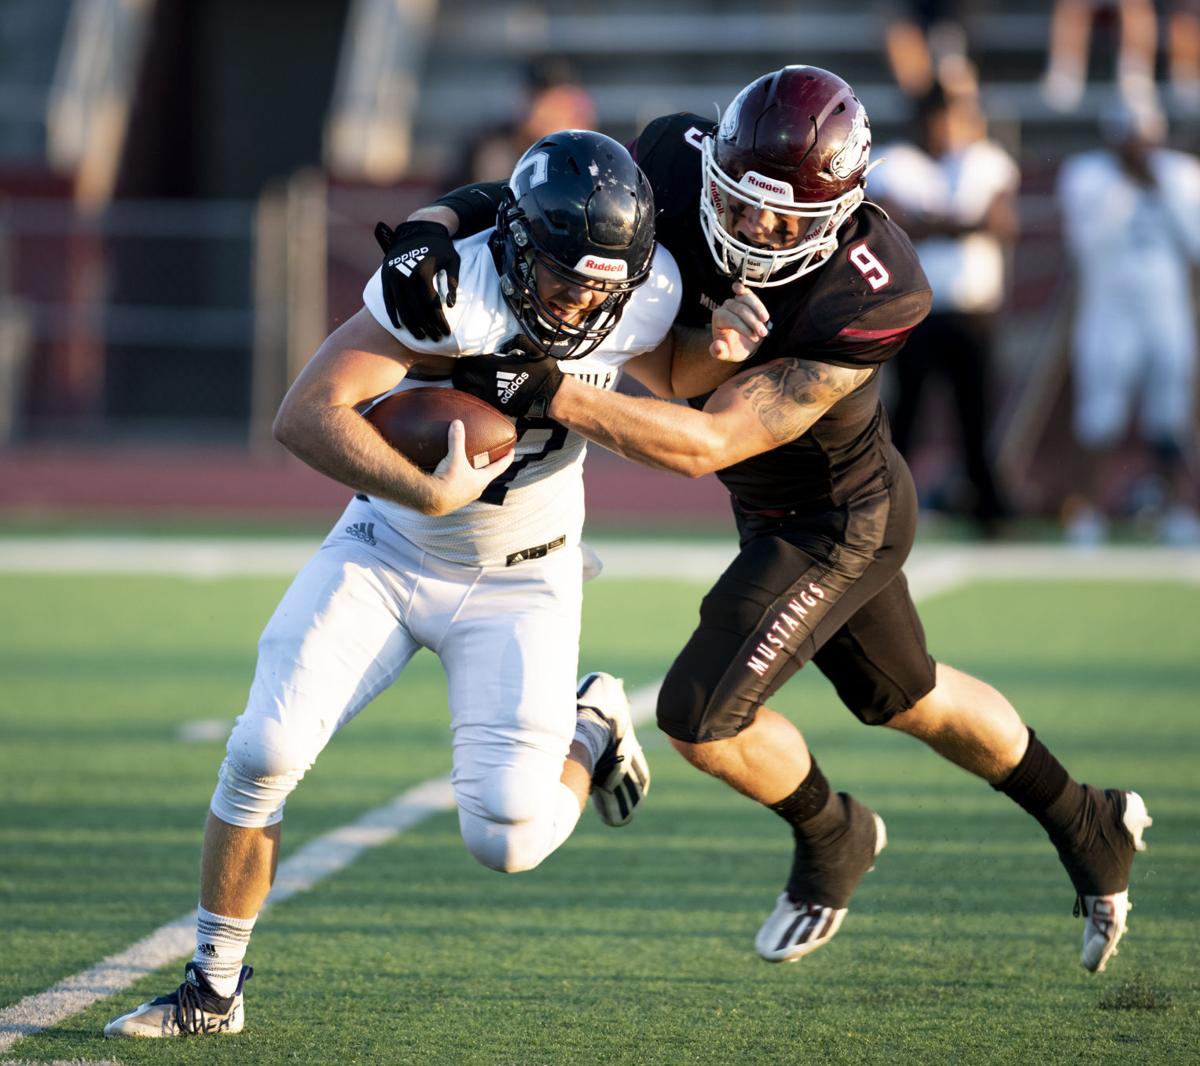 Morningside, Ottawa to meet in firstround NAIA football playoffs